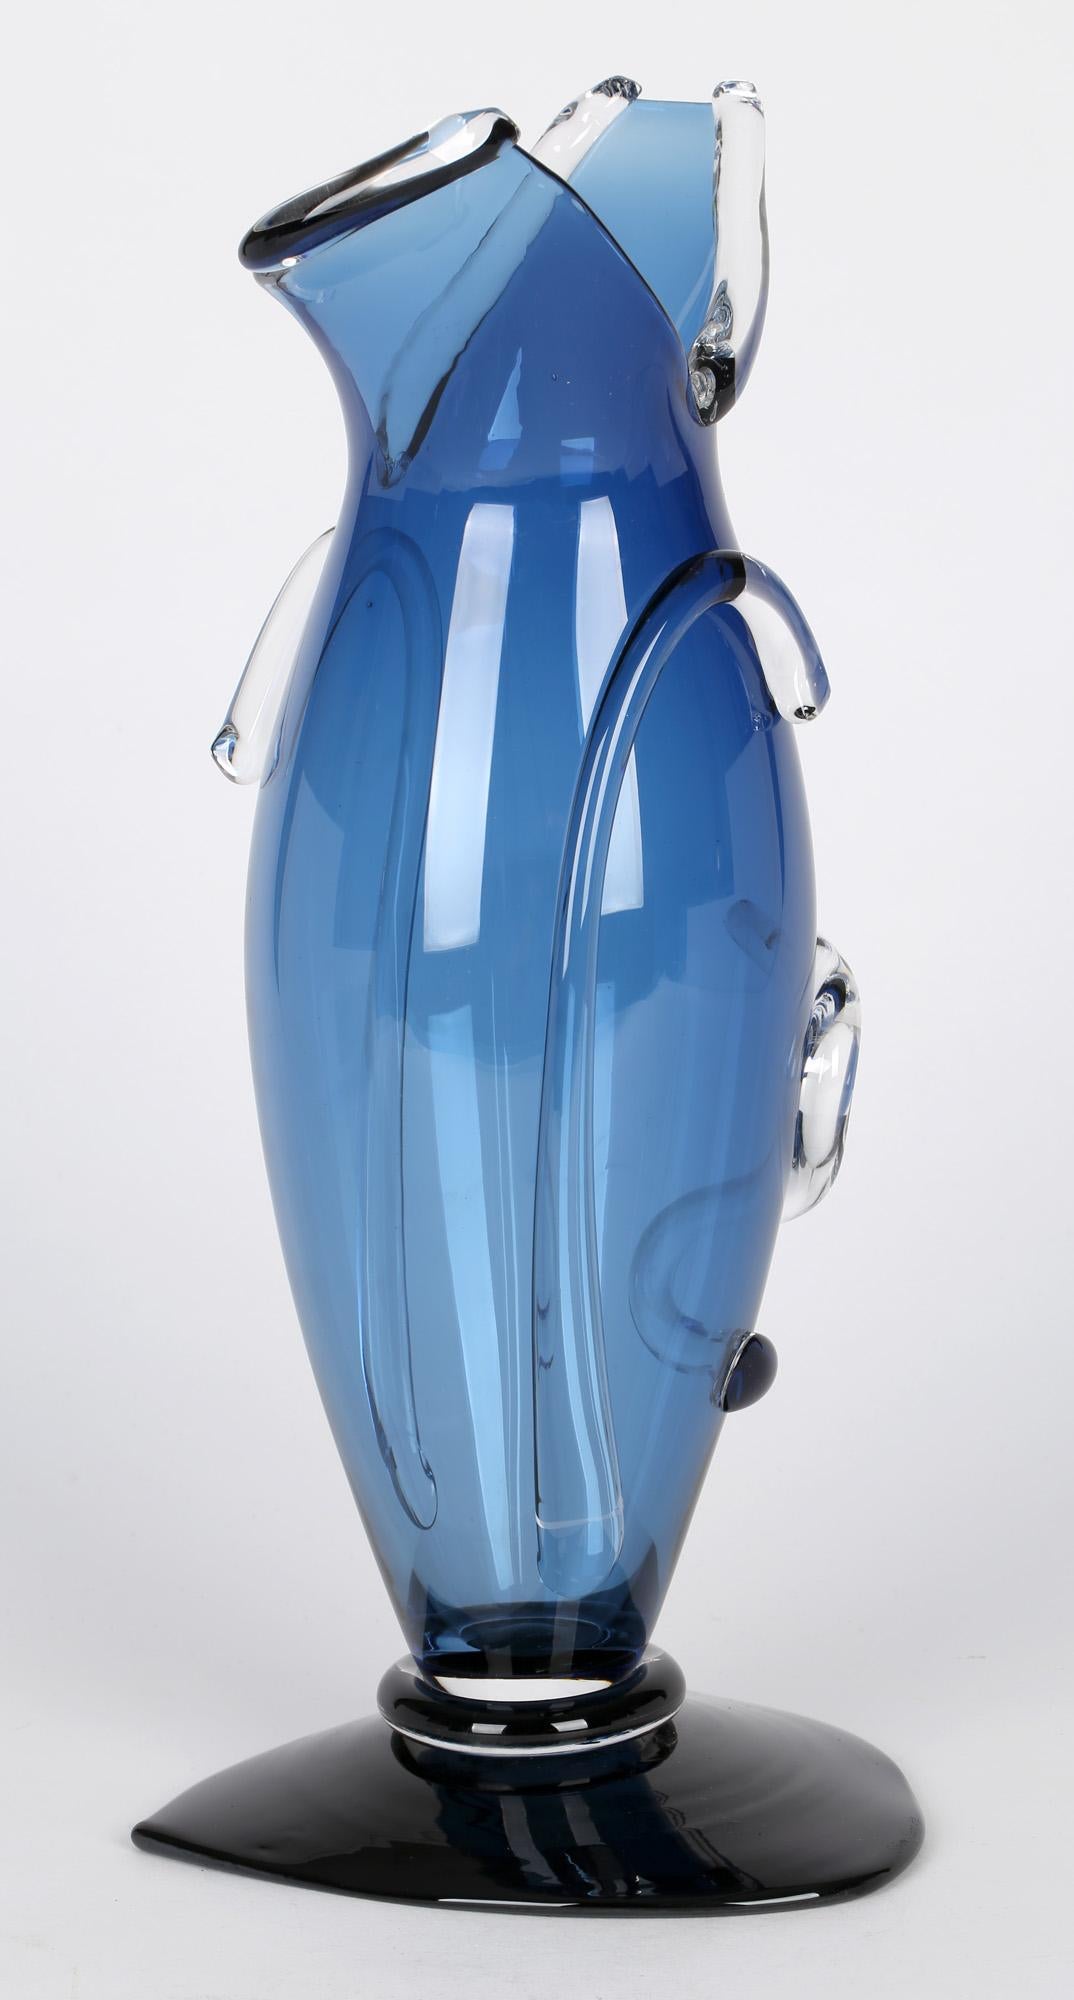 A very stylish modern English hand blown art glass vase by renowned glass maker Simon Moore (b.1959) dated 1989. Simon Moore has a had highly successful career since graduation in 1981 and has held a Visiting Professor title at the Royal College of